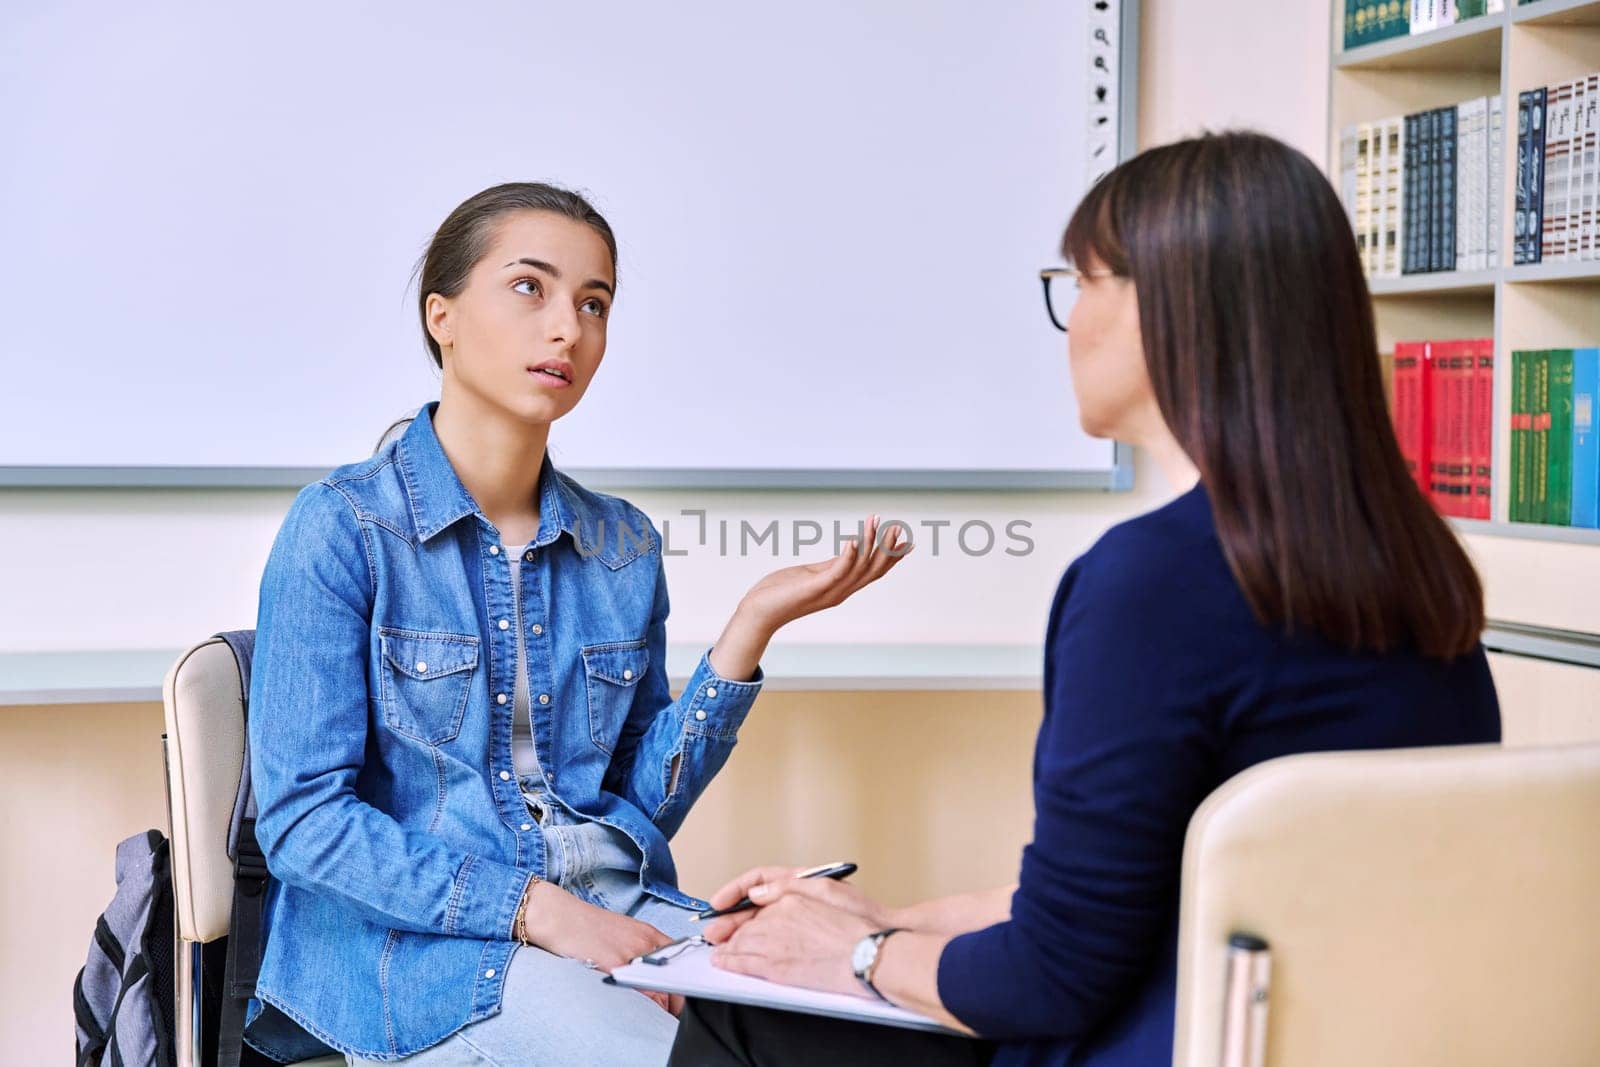 Psychologist consulting on behavior talks with serious teenage girl inside educational building in office. Social service, educational counselor mentor teacher psychotherapist, students adolescence